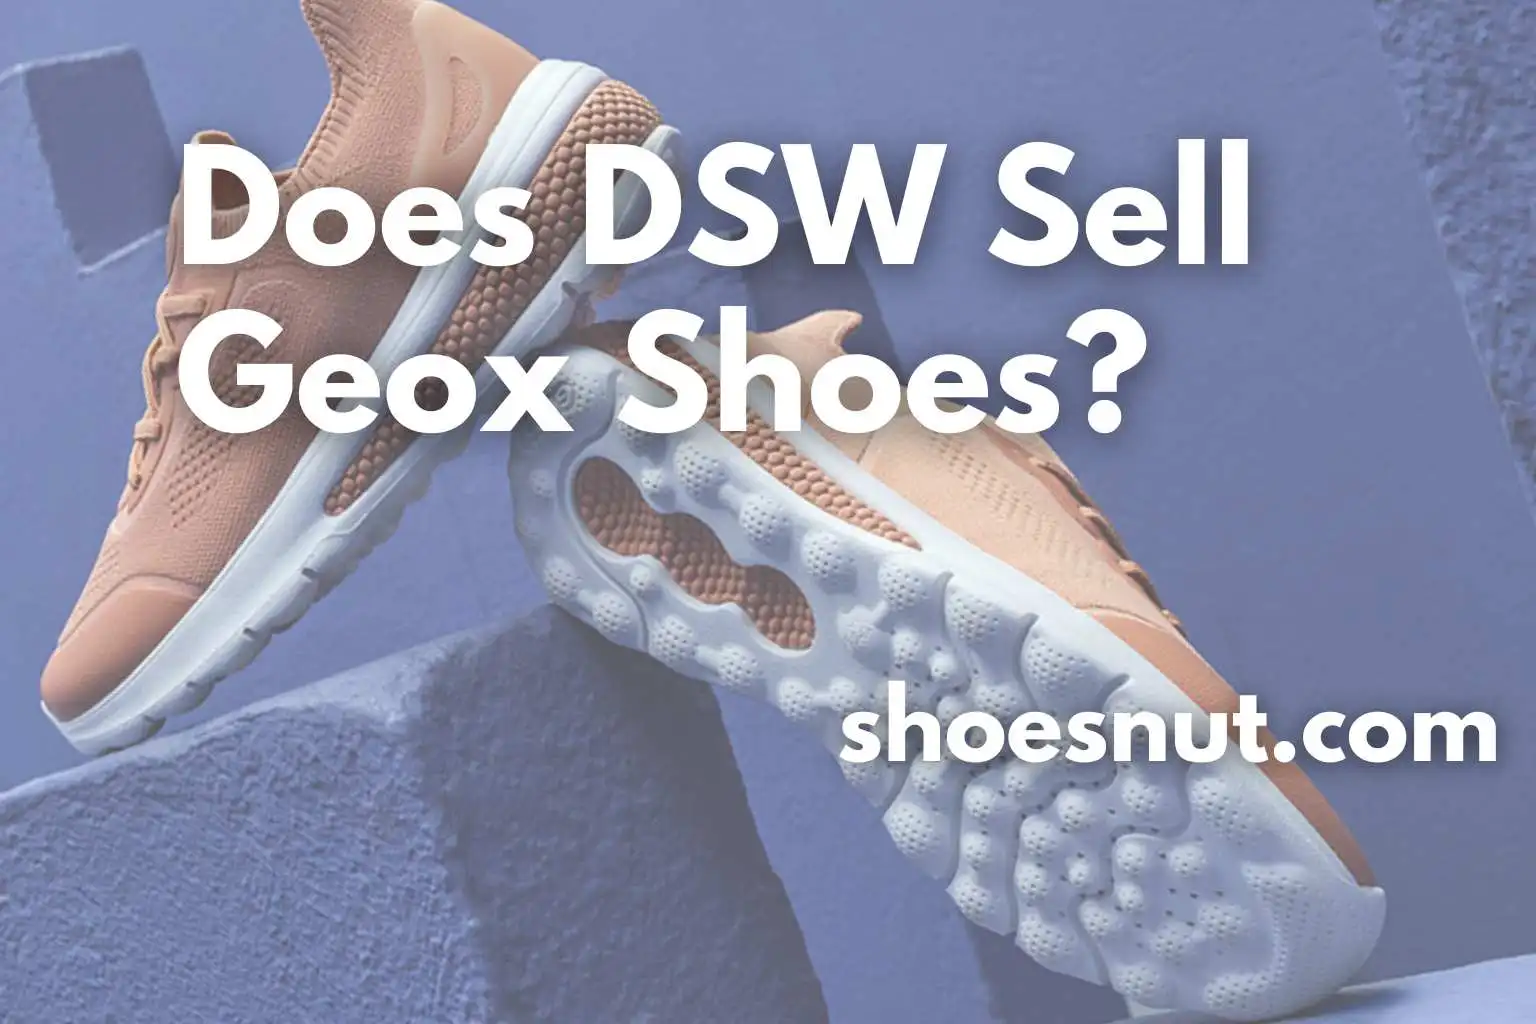 Does DSW Sell Geox Shoes?